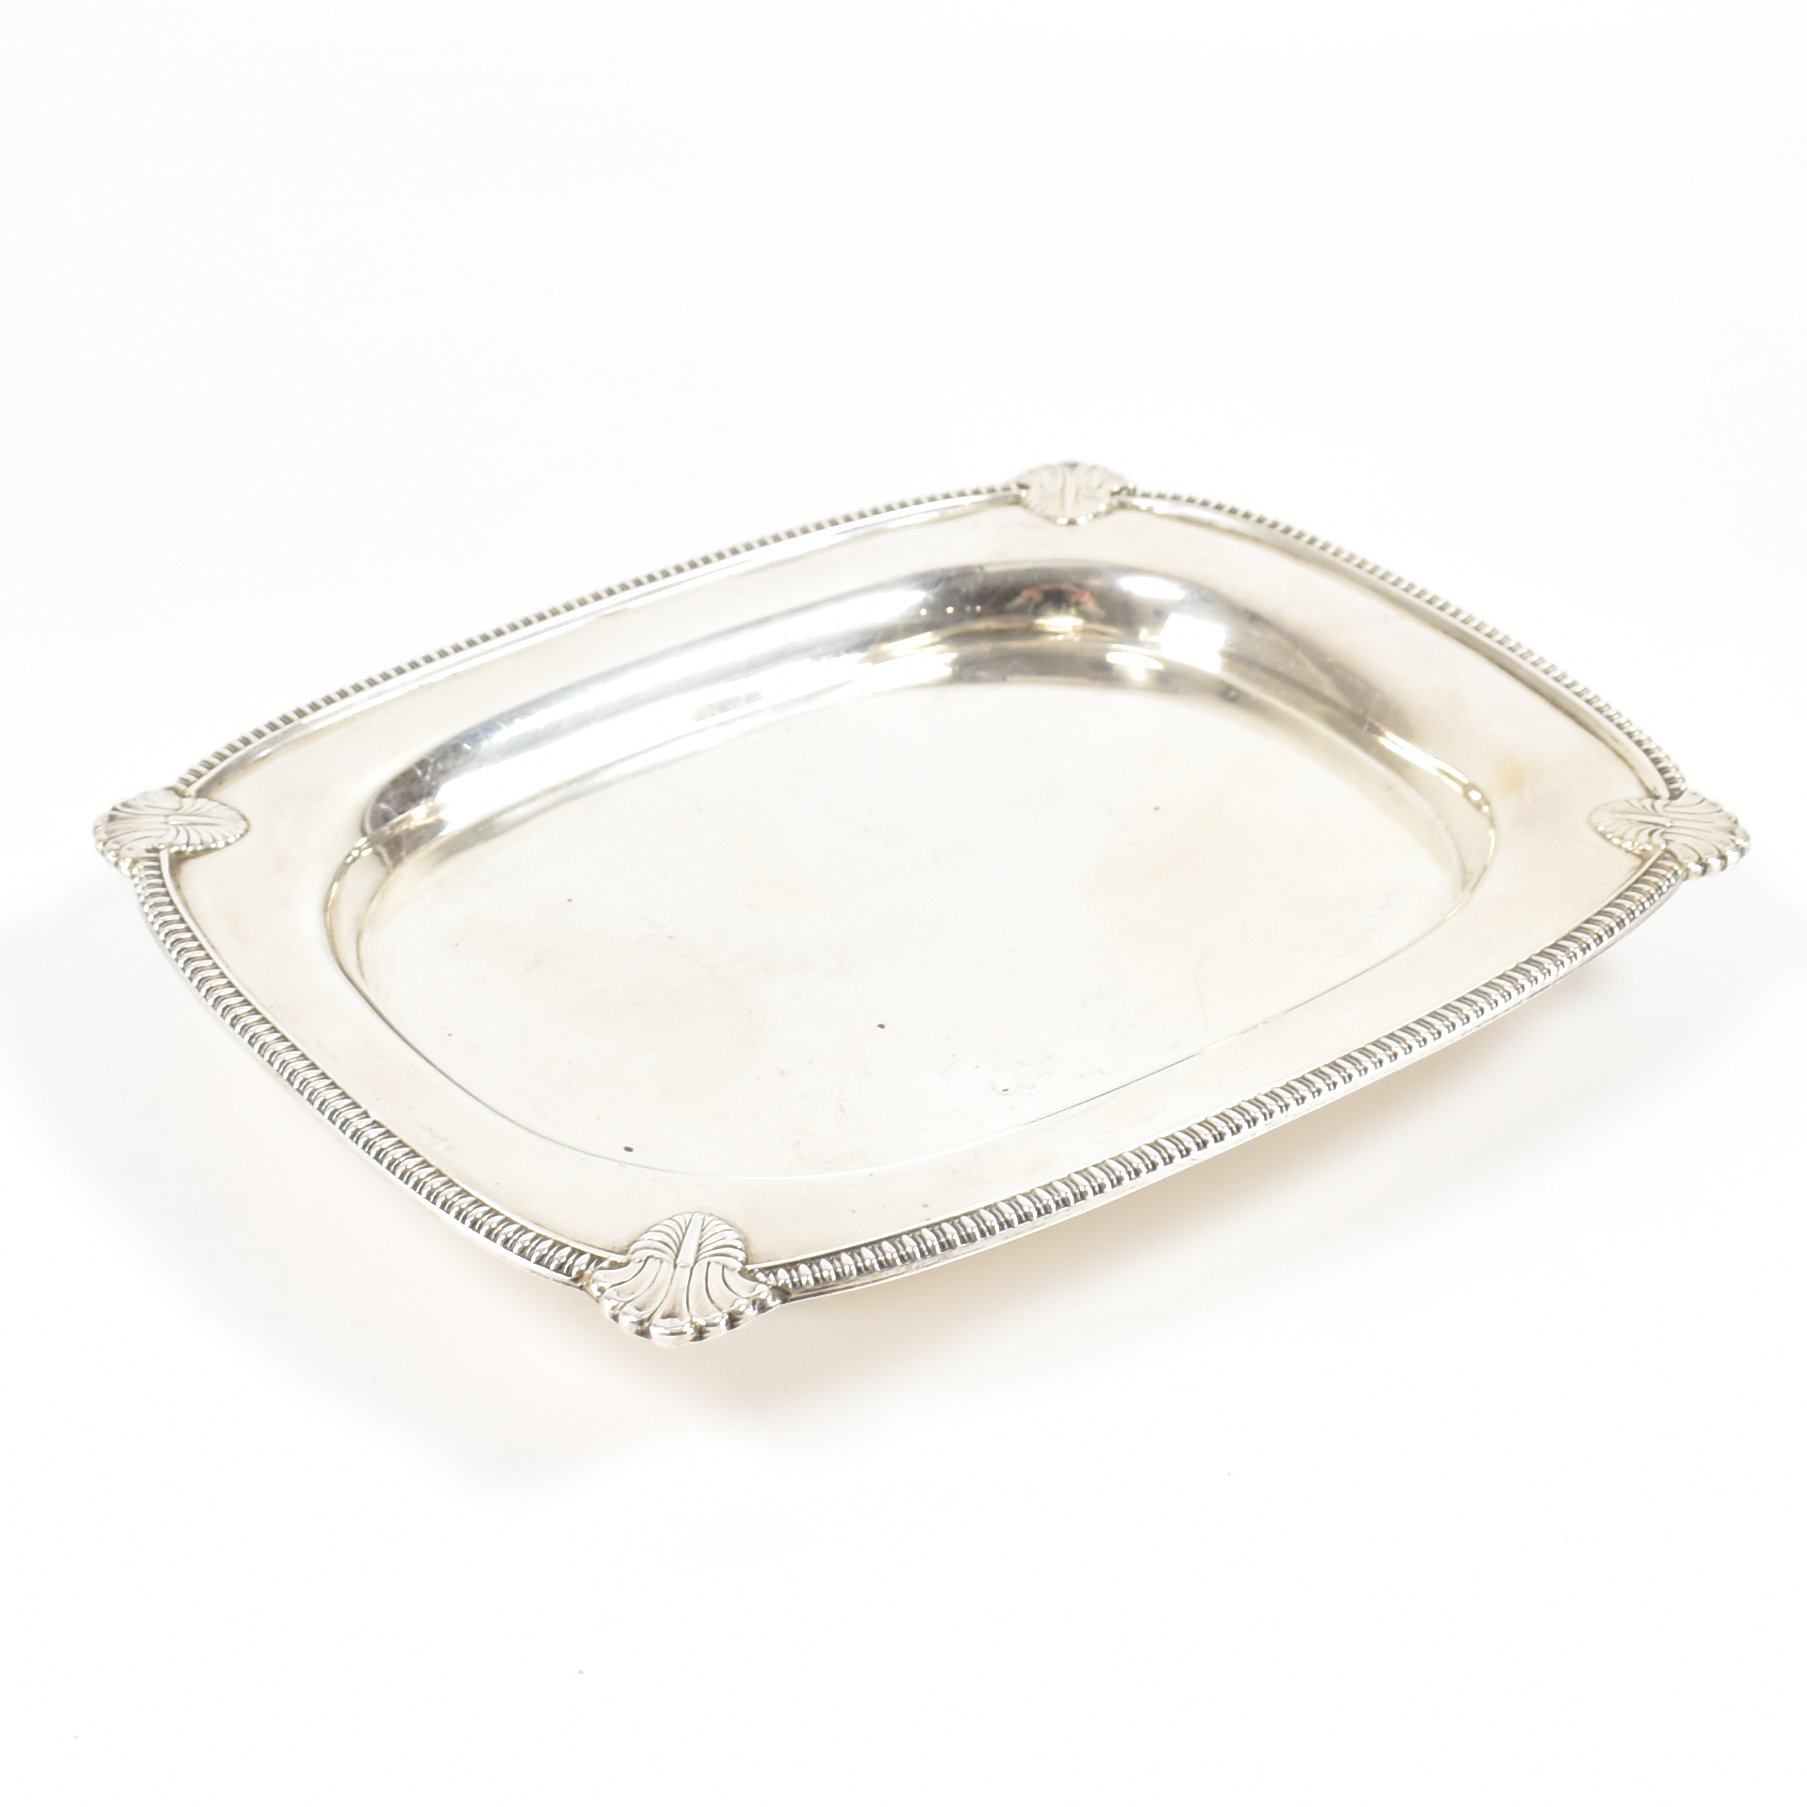 ANTIQUE SILVER HALLMARKED CARD TRAY - Image 2 of 5